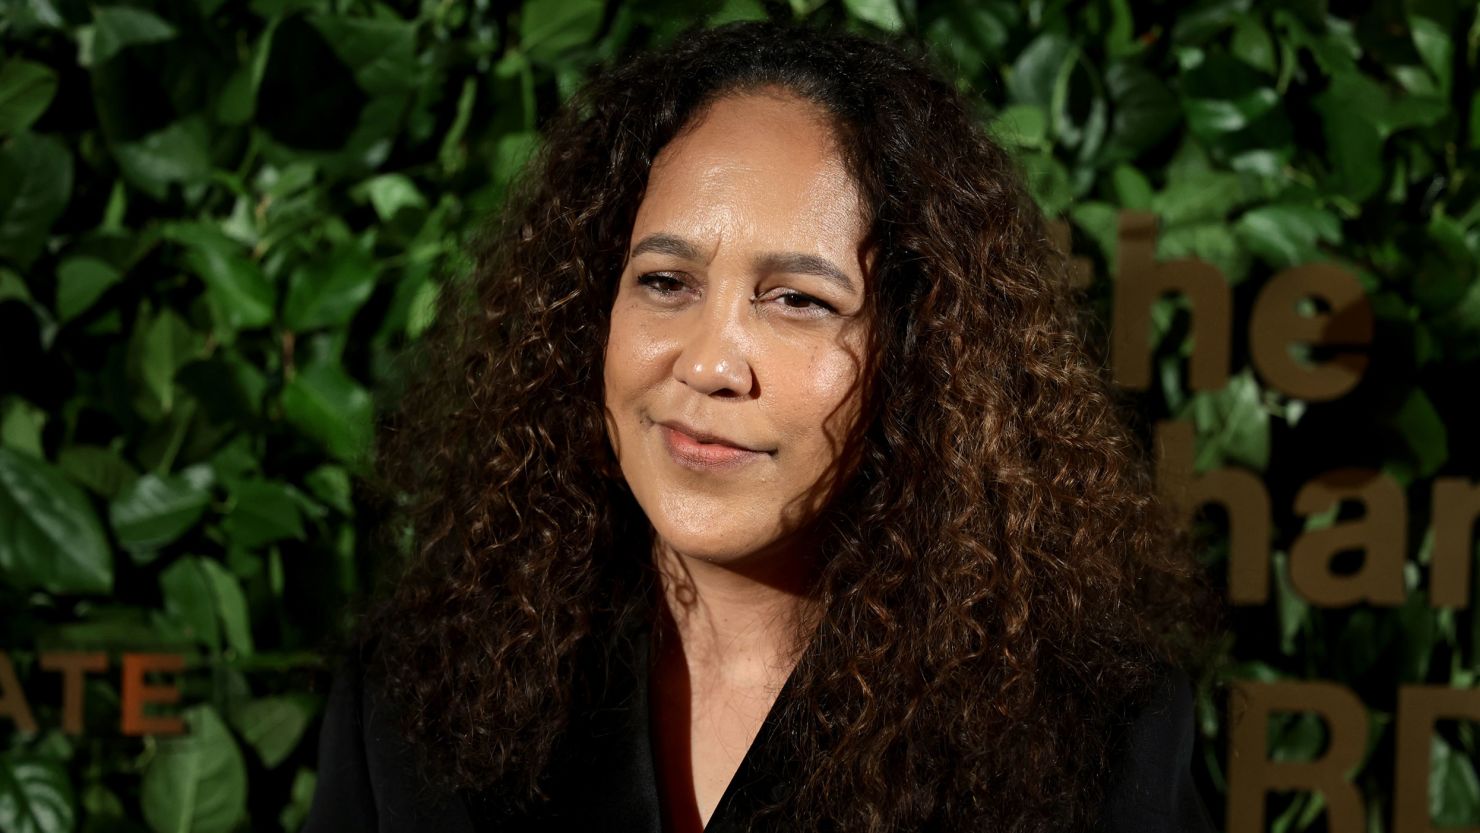 Director Gina Prince-Bythewood, seen here in November in New York City, is speaking out about her film 'The Woman King' receiving no Oscars nominations.